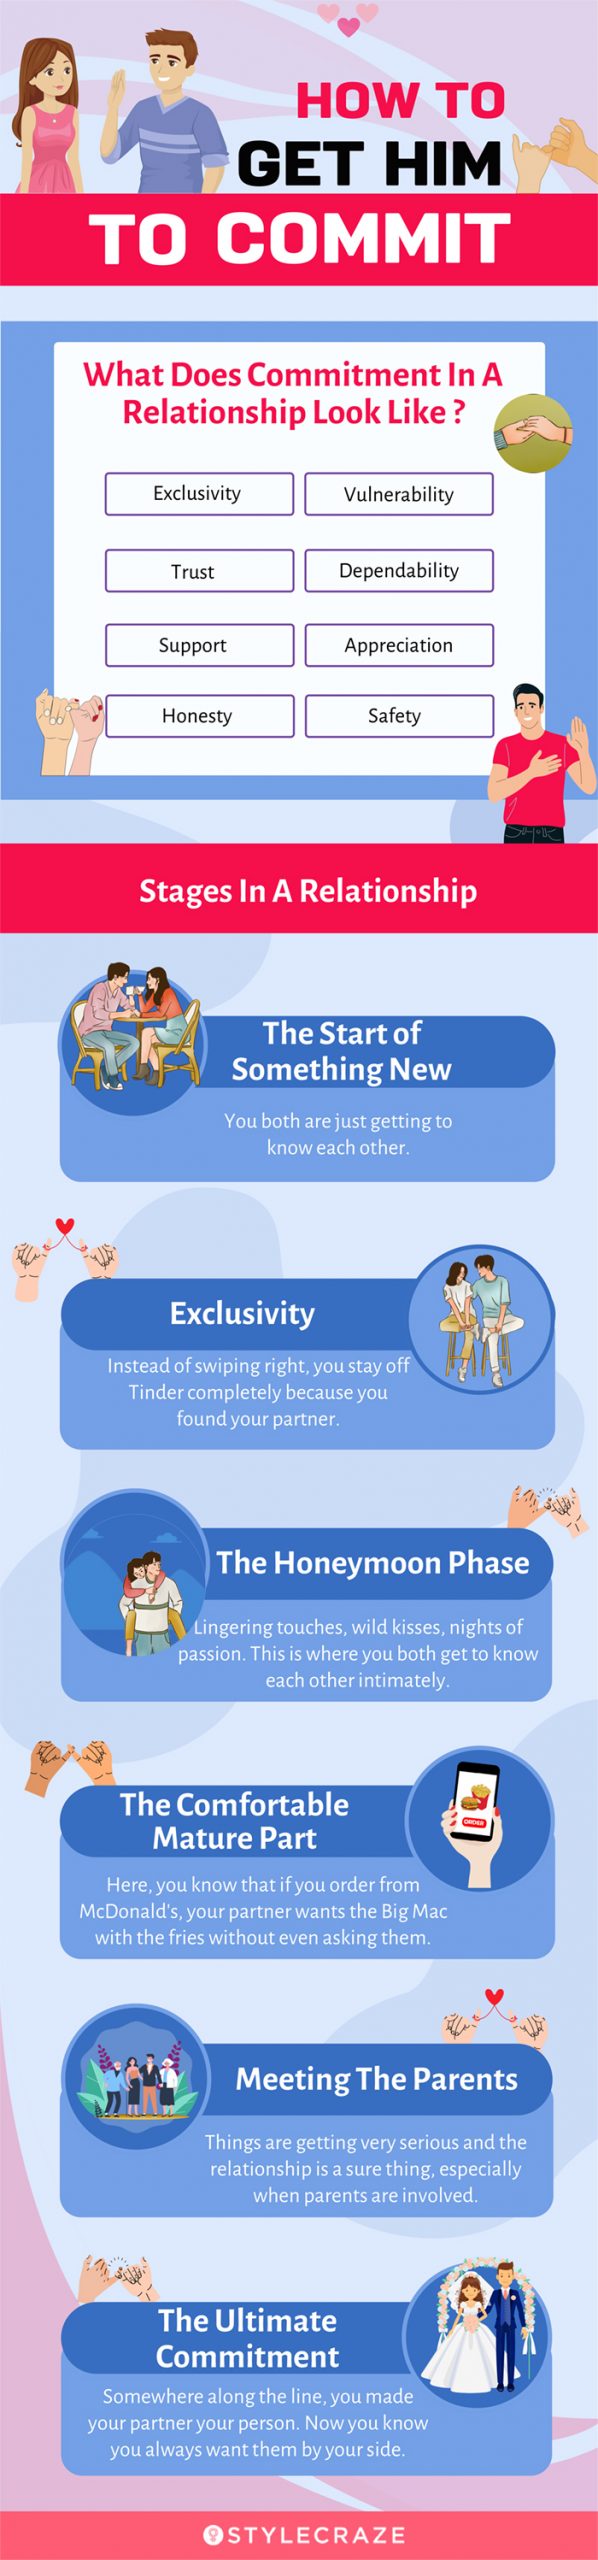 how to get him to commit (infographic)